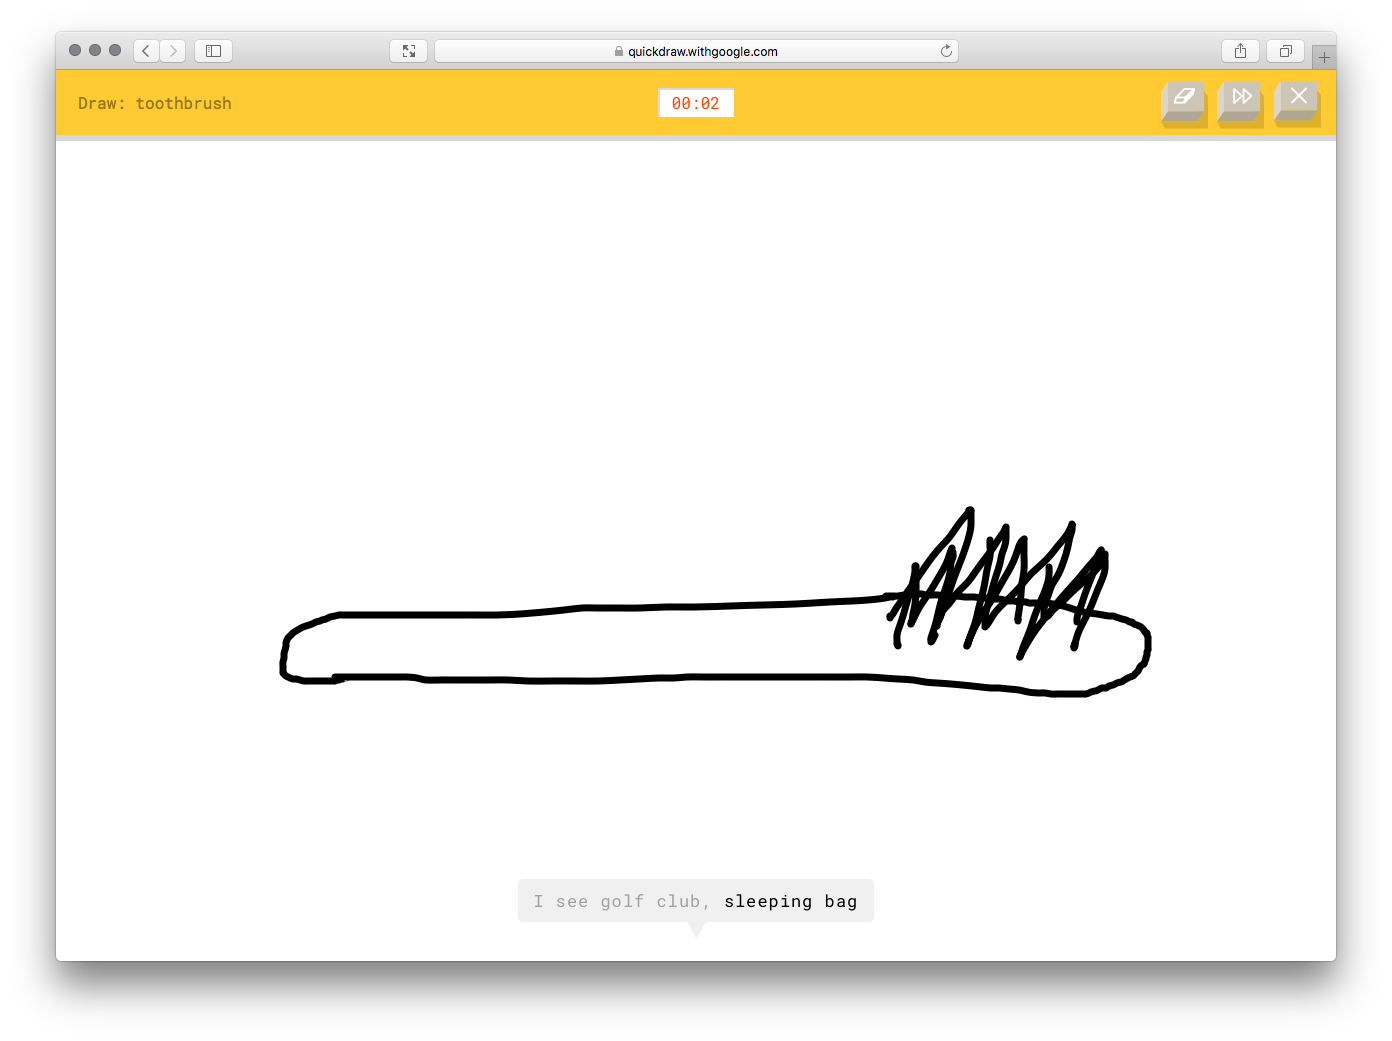 download quick draw